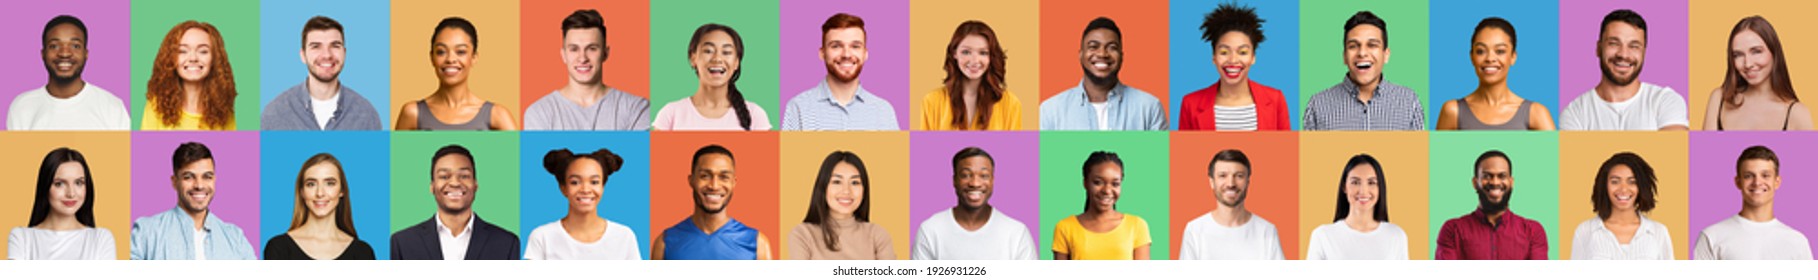 Colorful Mosaic Of Happy Faces And Portraits Of Young Millennial People Smiling Posing On Different Colored Backgrounds. Millennials Generation, Successful Multicutural People Group Portrait. Collage